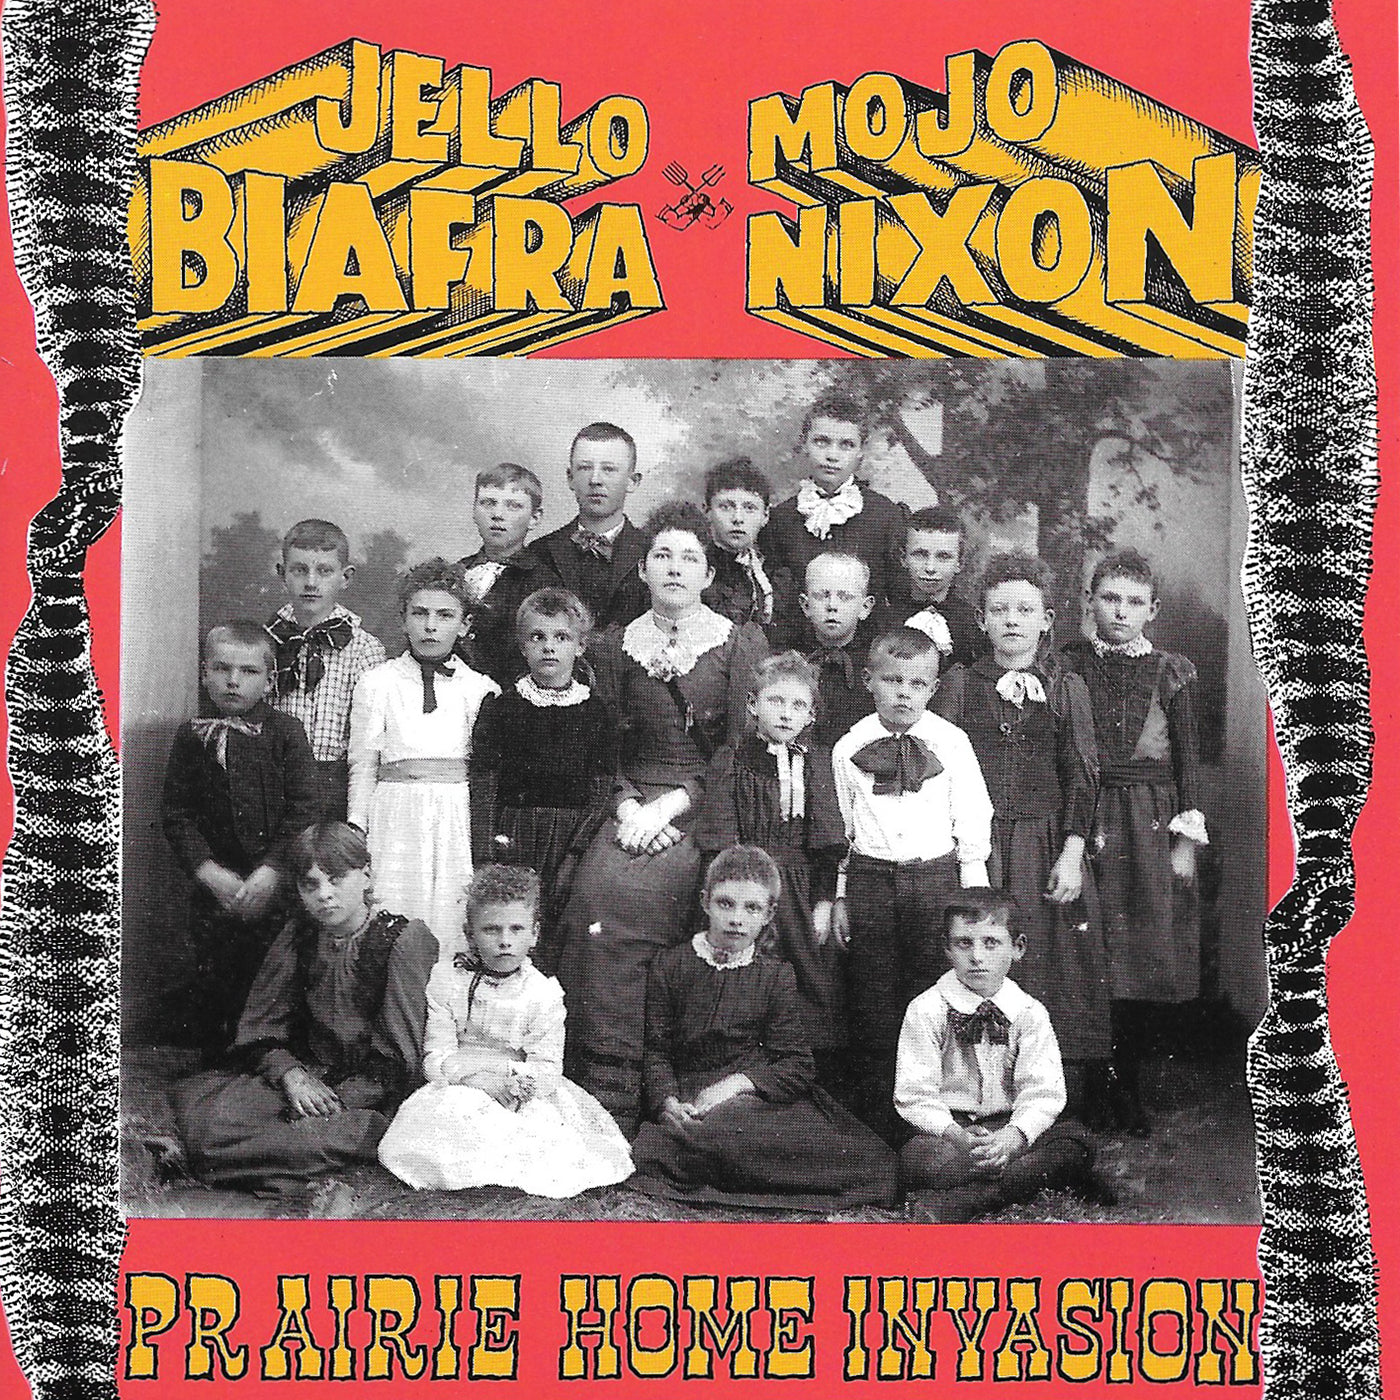 JELLO BIAFRA & MOJO NIXON VIDEO PREMIERE FOR "WILL THE FETUS BE ABORTED" FROM  PRAIRIE HOME INVASION LP